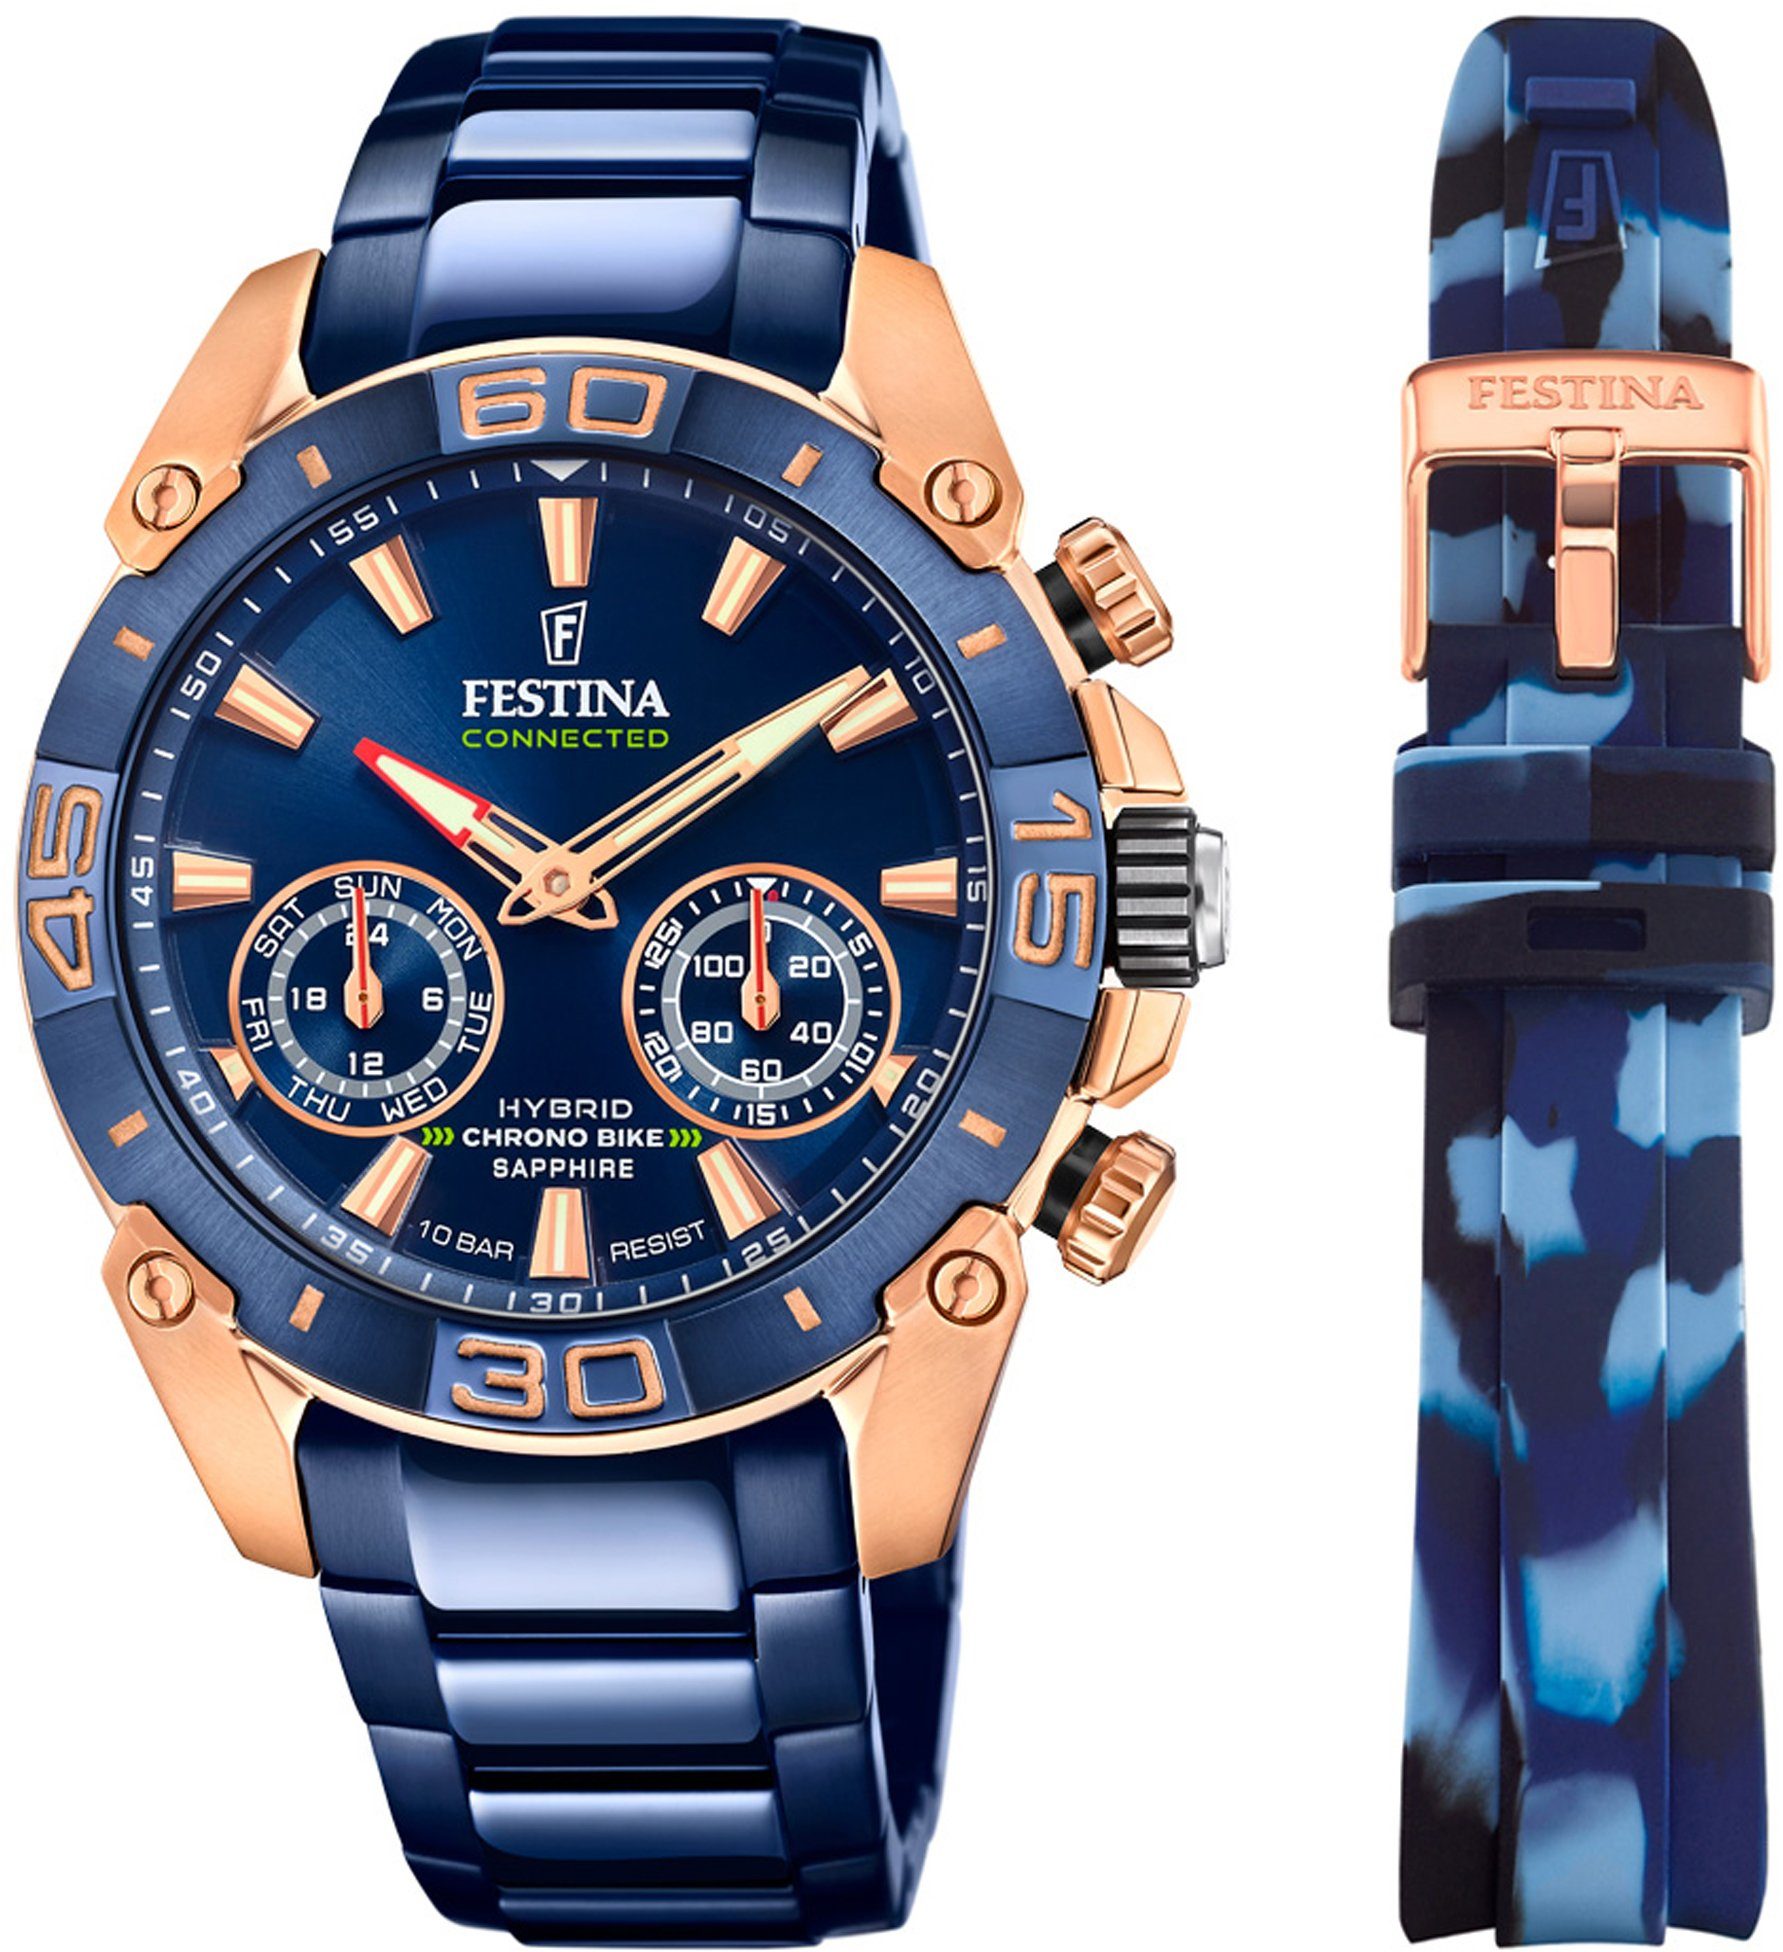 Bike auch Wechselband), Edition mit ideal Geschenk 2-tlg., Festina Special (Set, - 2021 Chronograph als Connected, Chrono F20549/1,